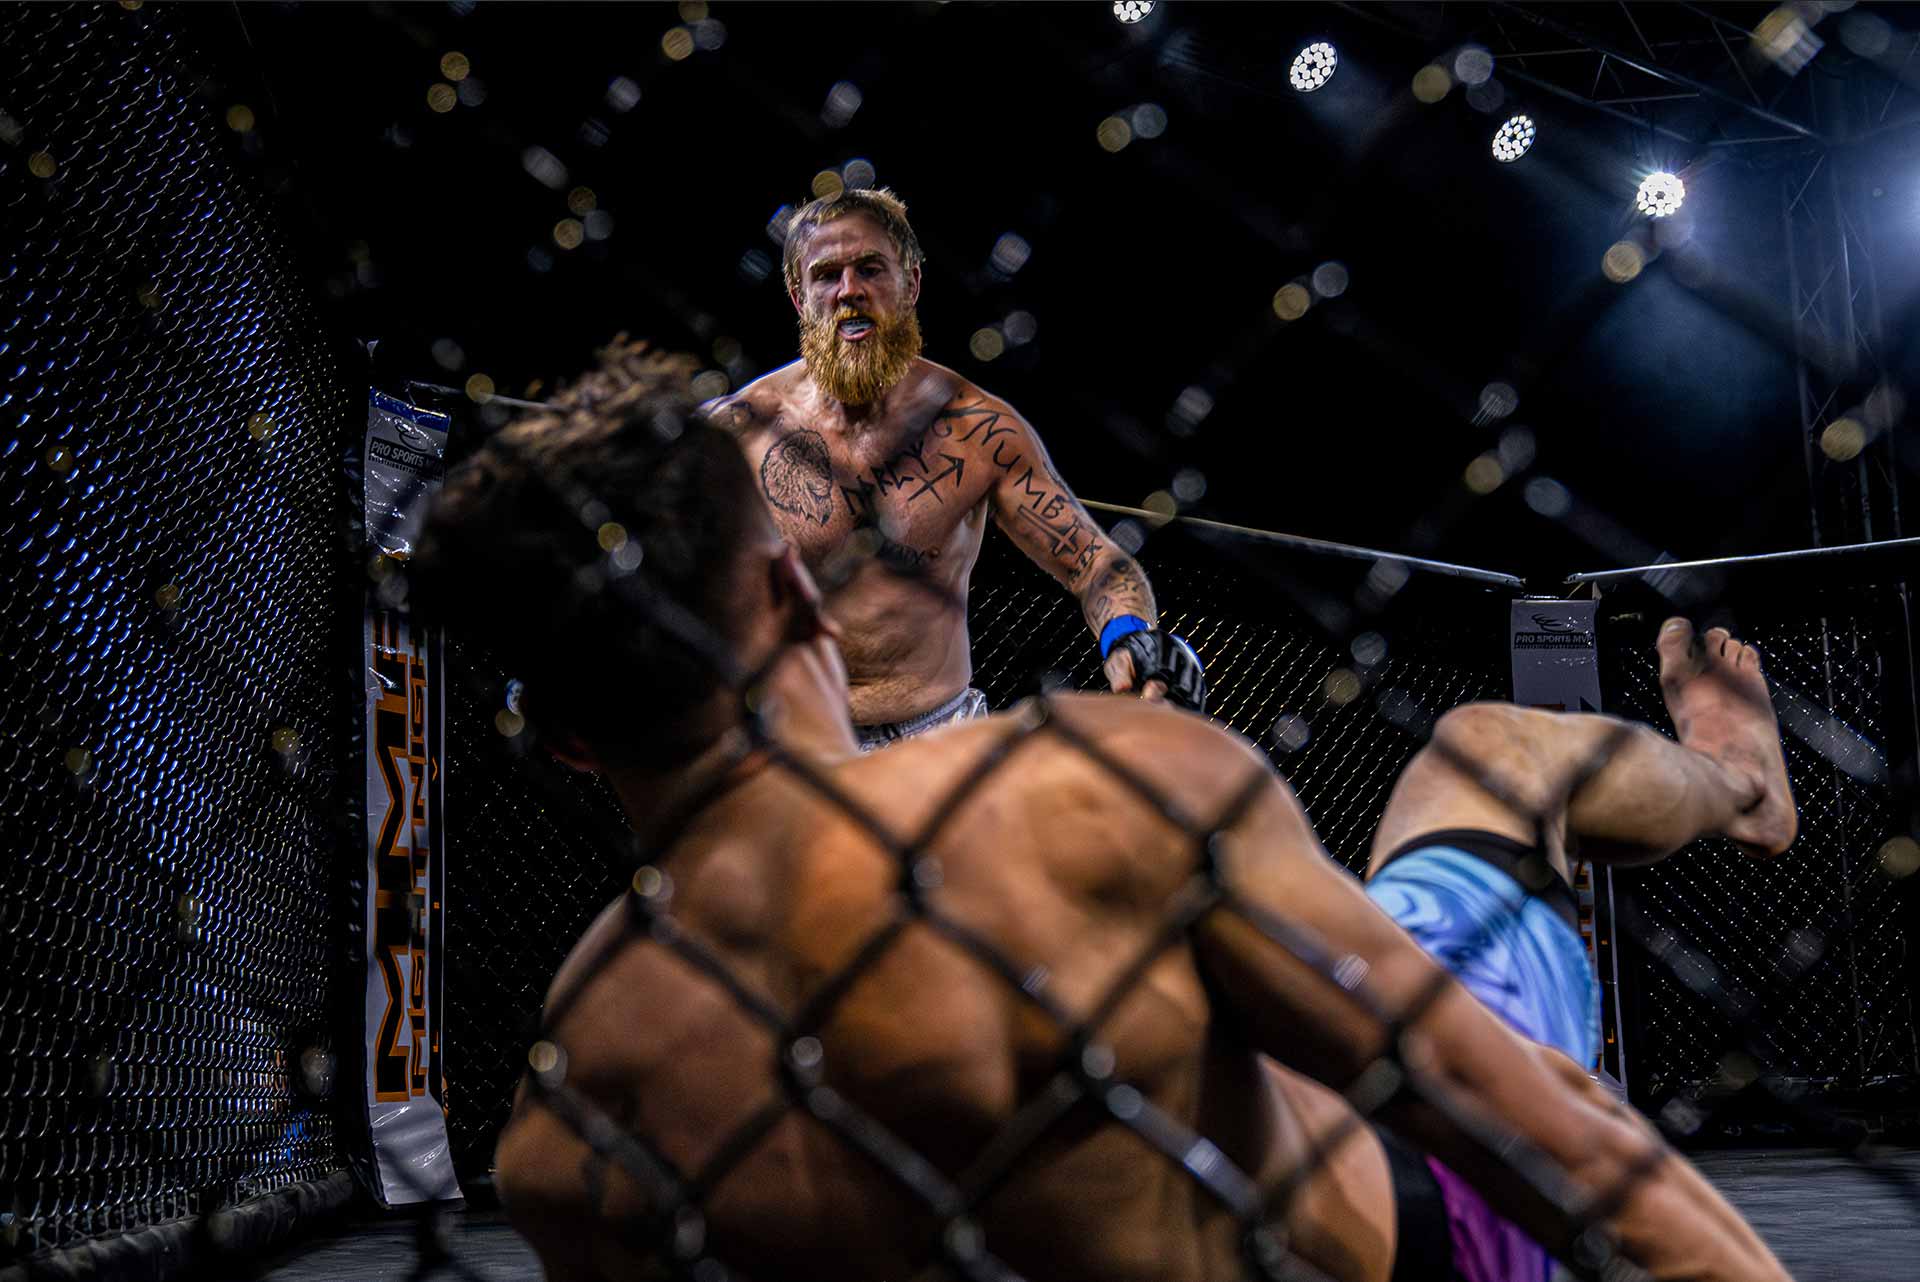 fighting in the cage